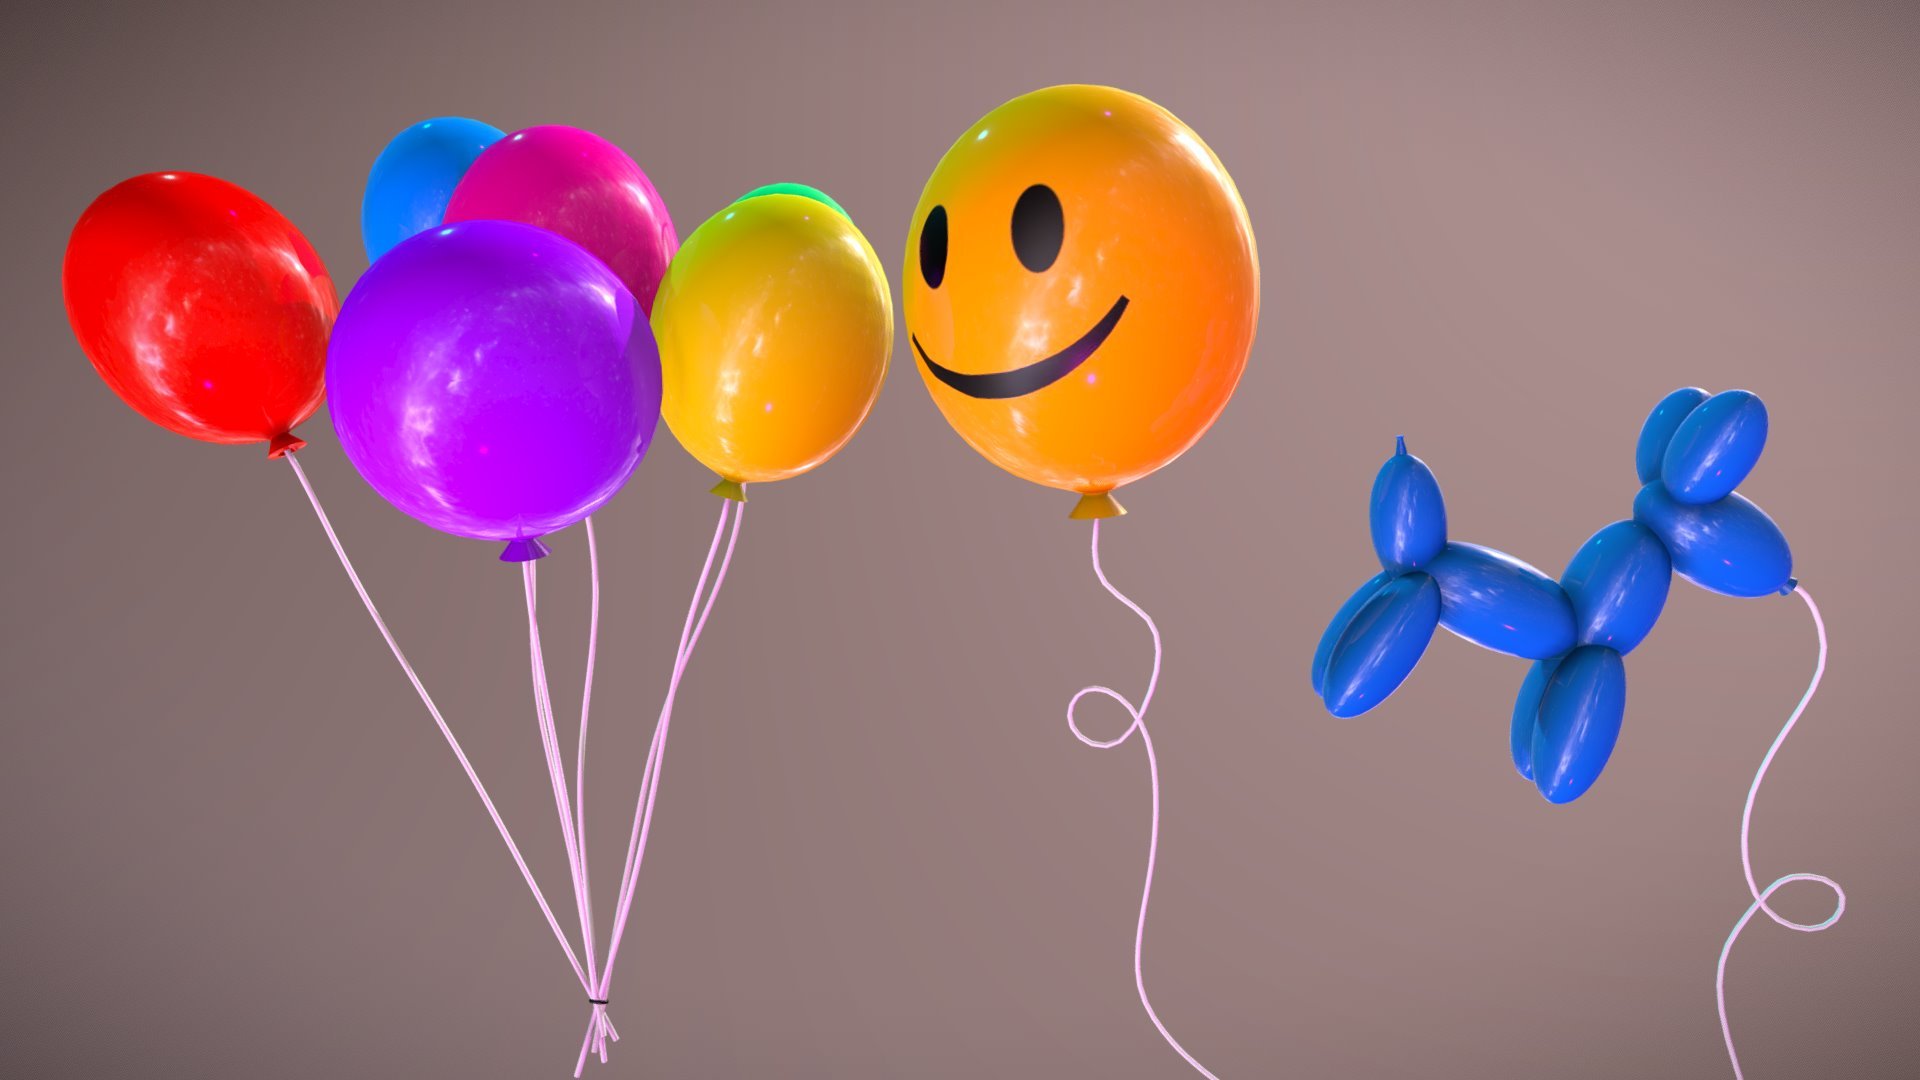 Some of my balloon models for a second year carnival environment project! - Balloons - 3D model by SianBoyle 3d model